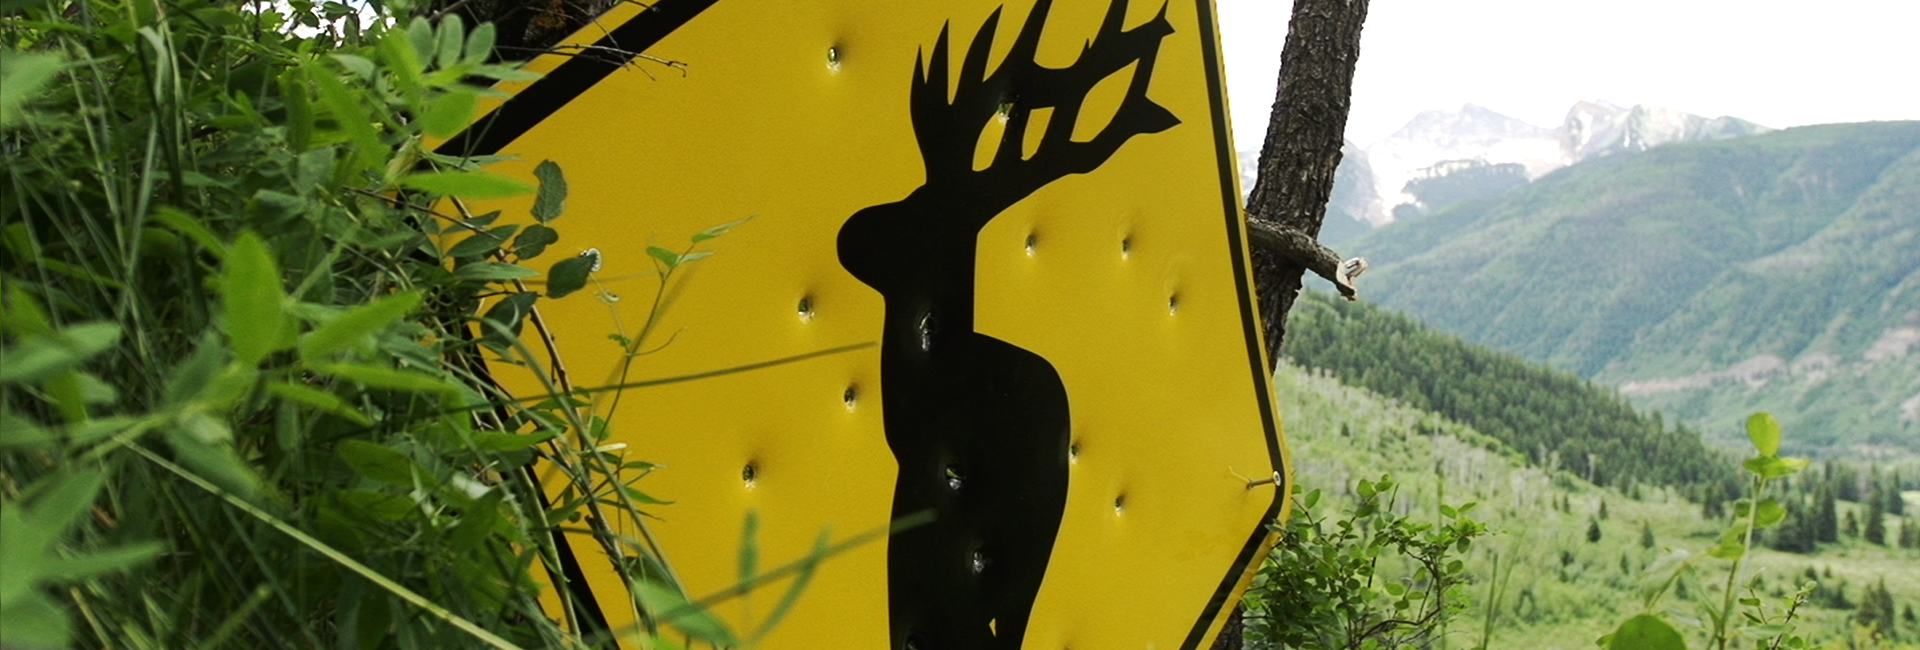 yellow road sign with elk body and holes in it with green mountain background